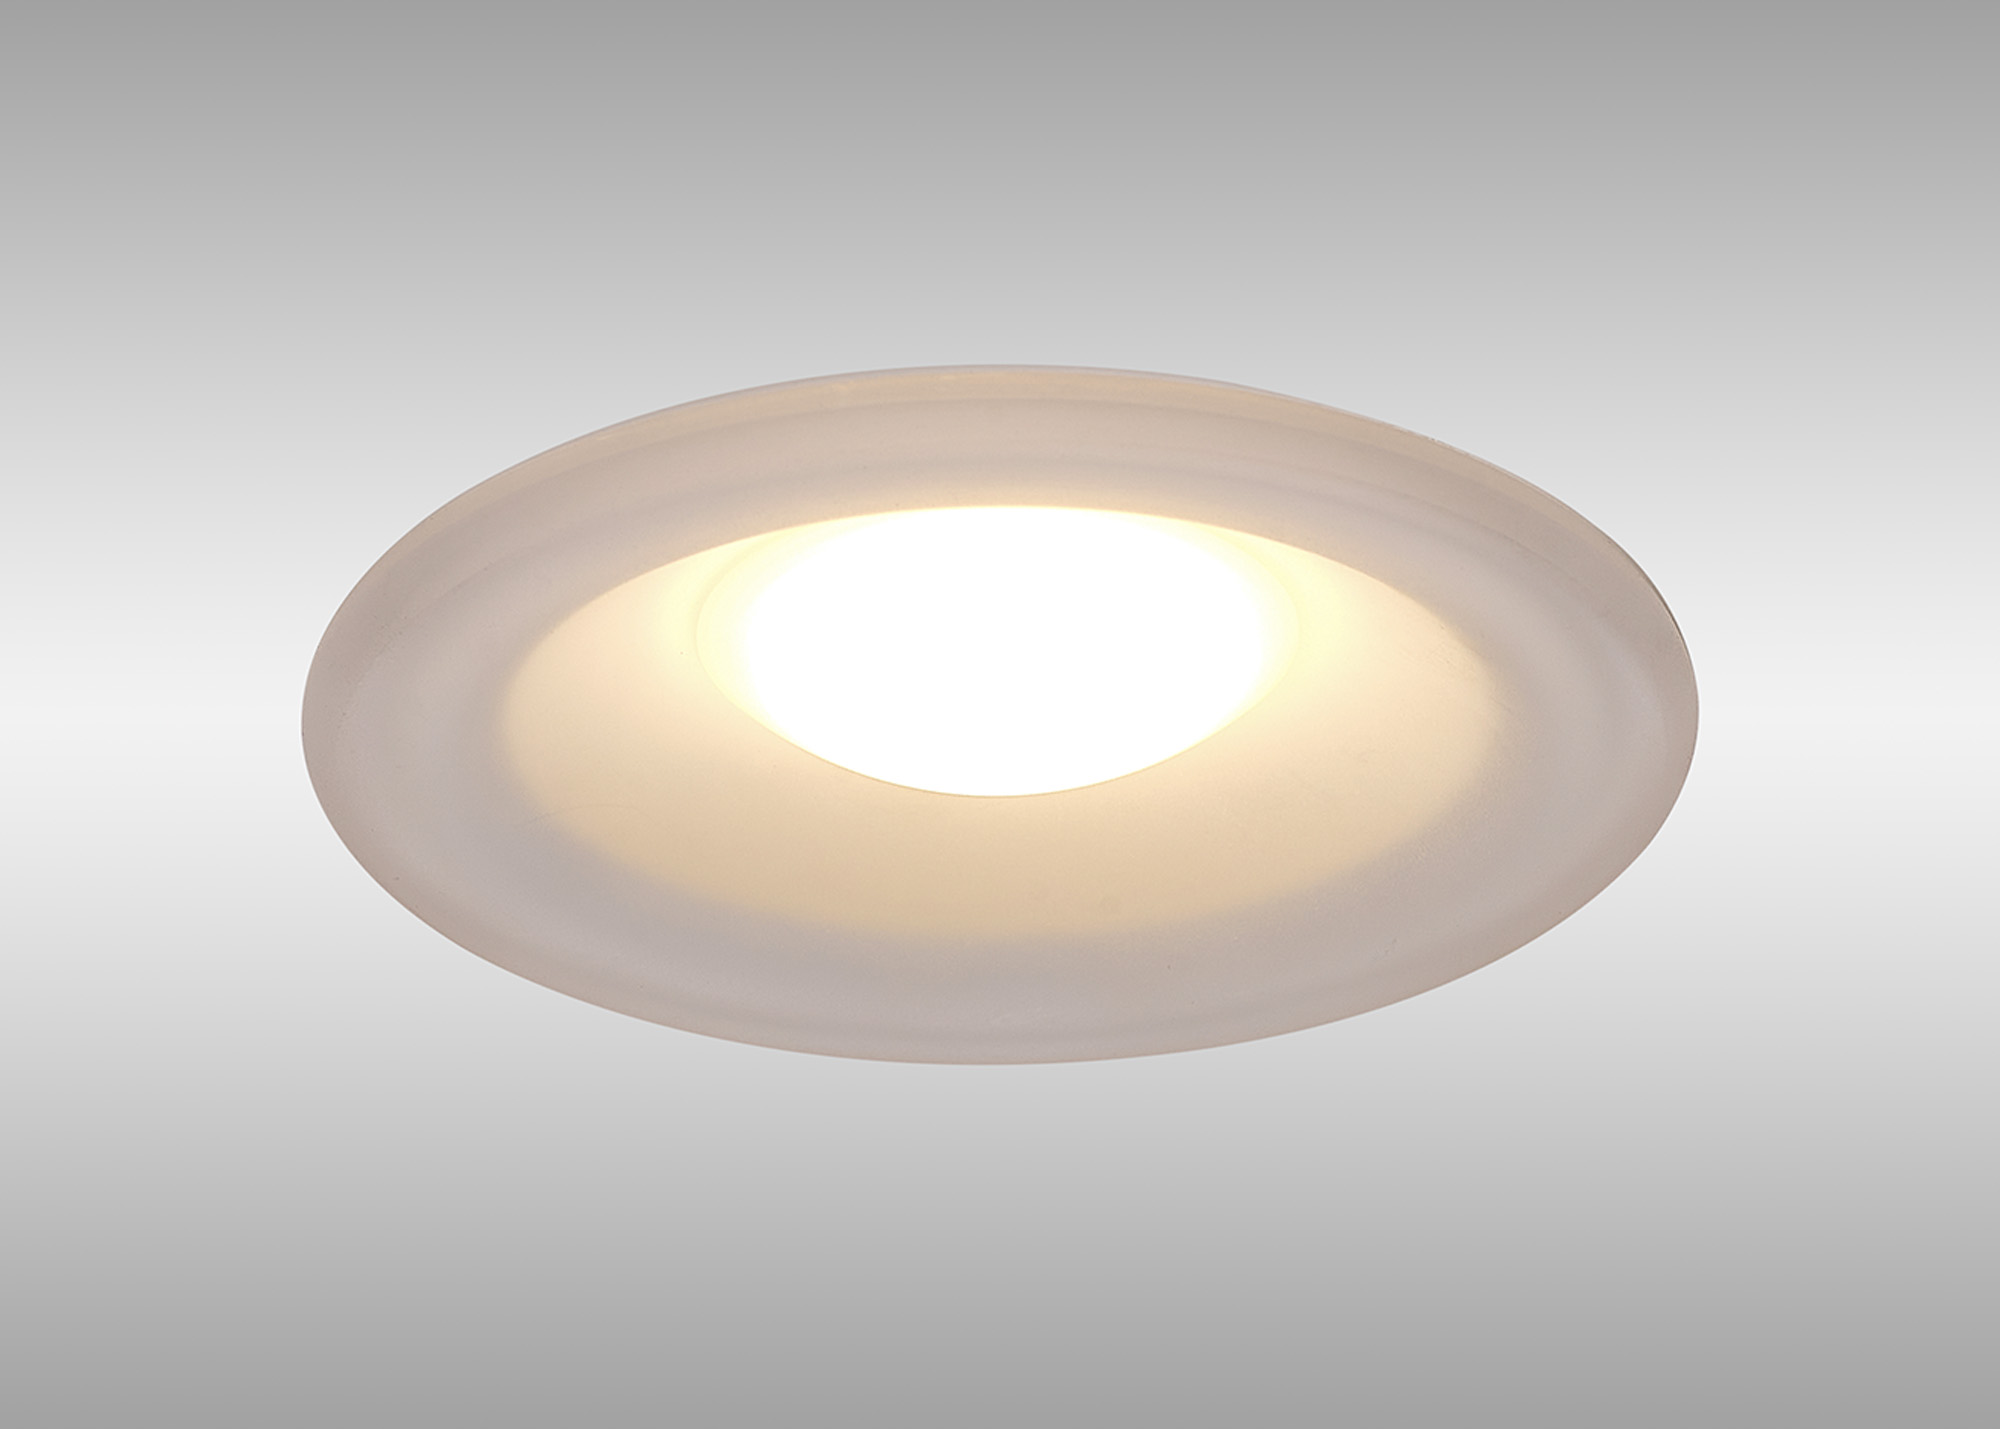 Lagos Ceiling Lights Mantra Fusion Recessed Lights